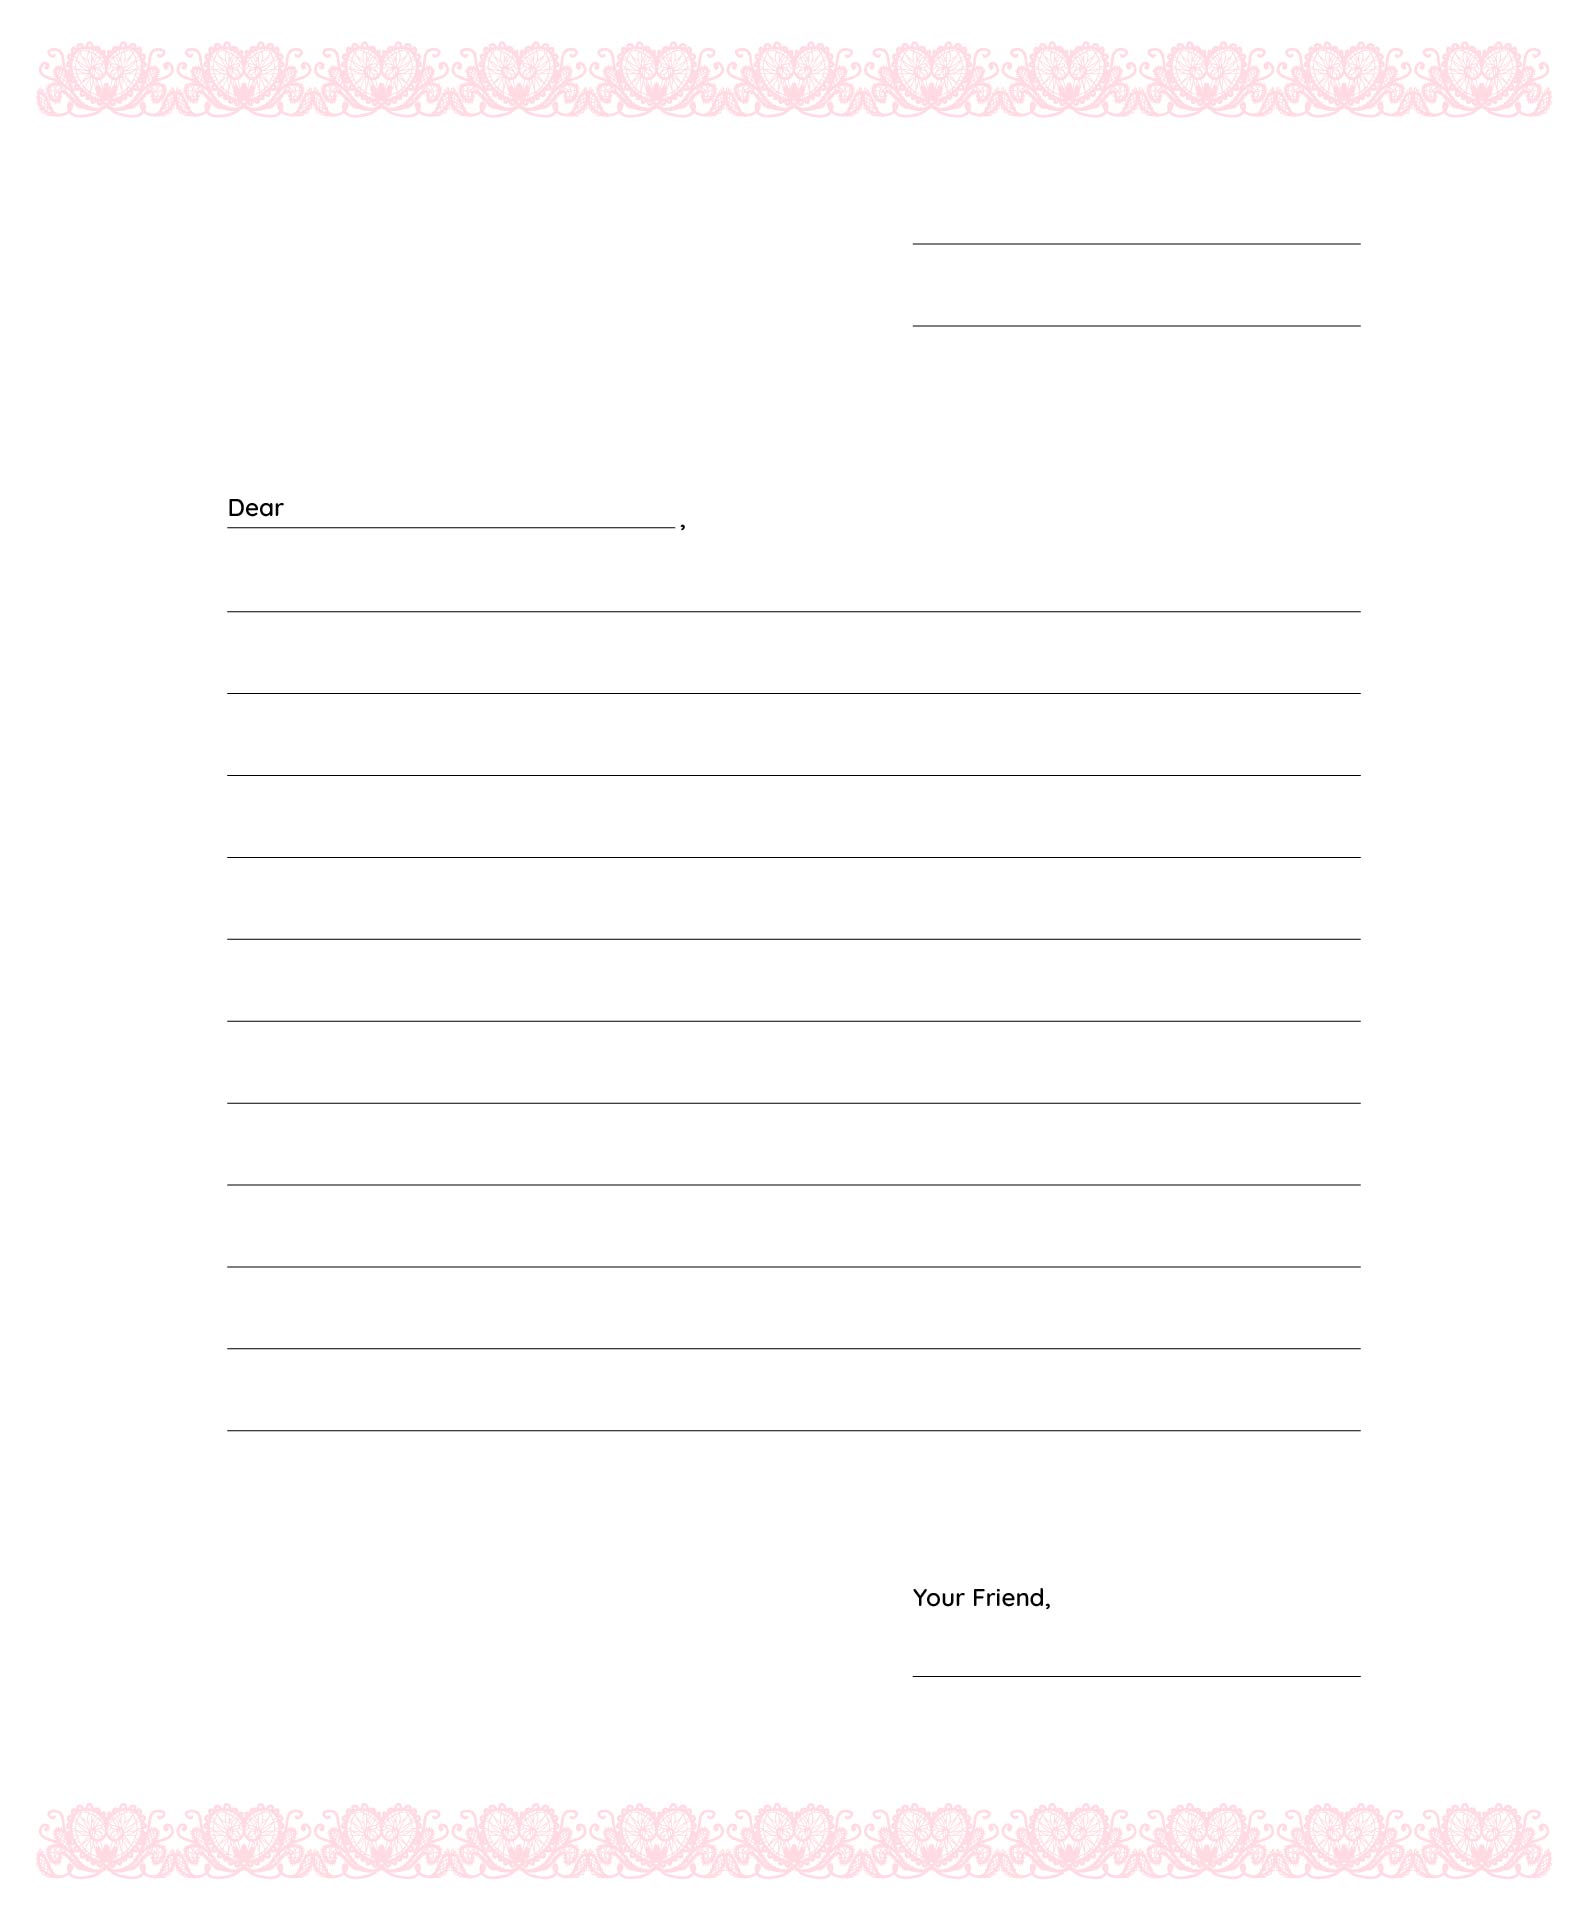 printable-letter-forms-printable-forms-free-online